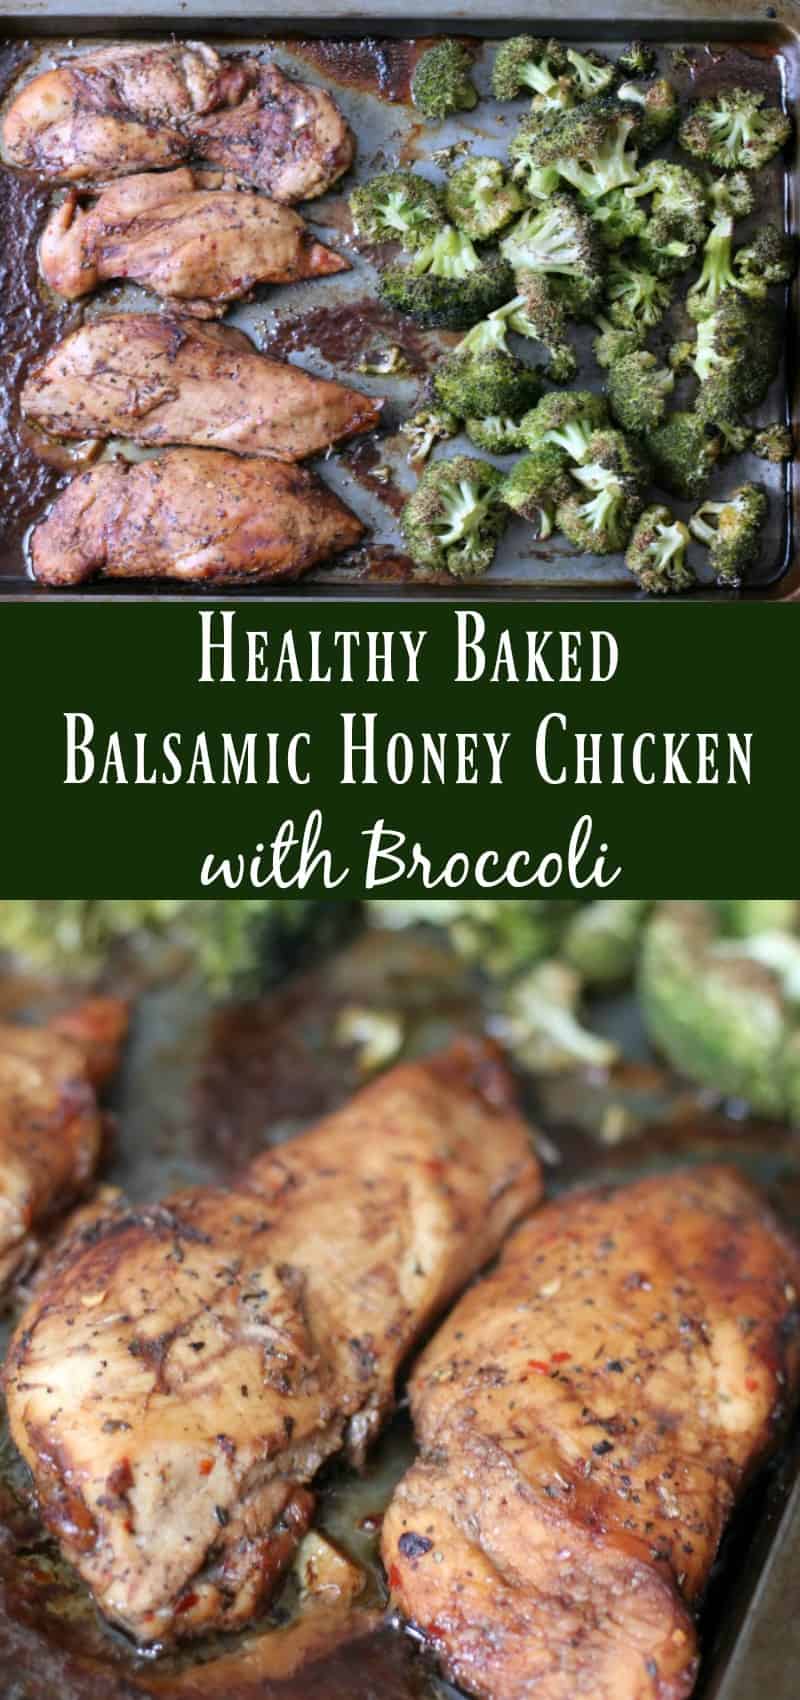 Healthy Baked Balsamic Honey Chicken with Broccoli